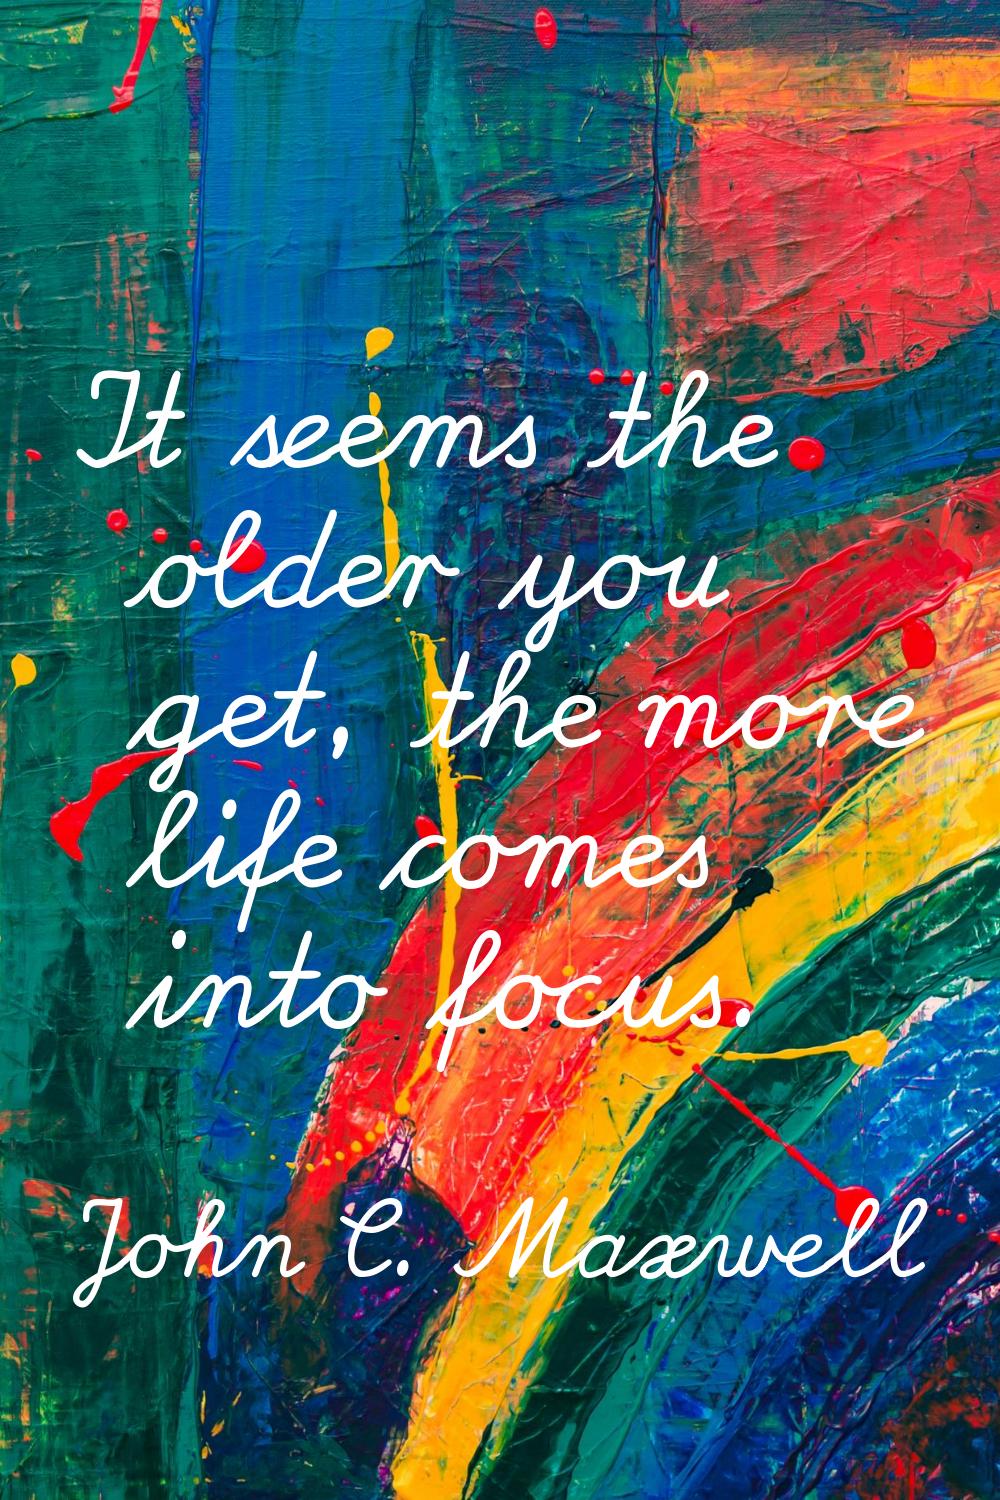 It seems the older you get, the more life comes into focus.